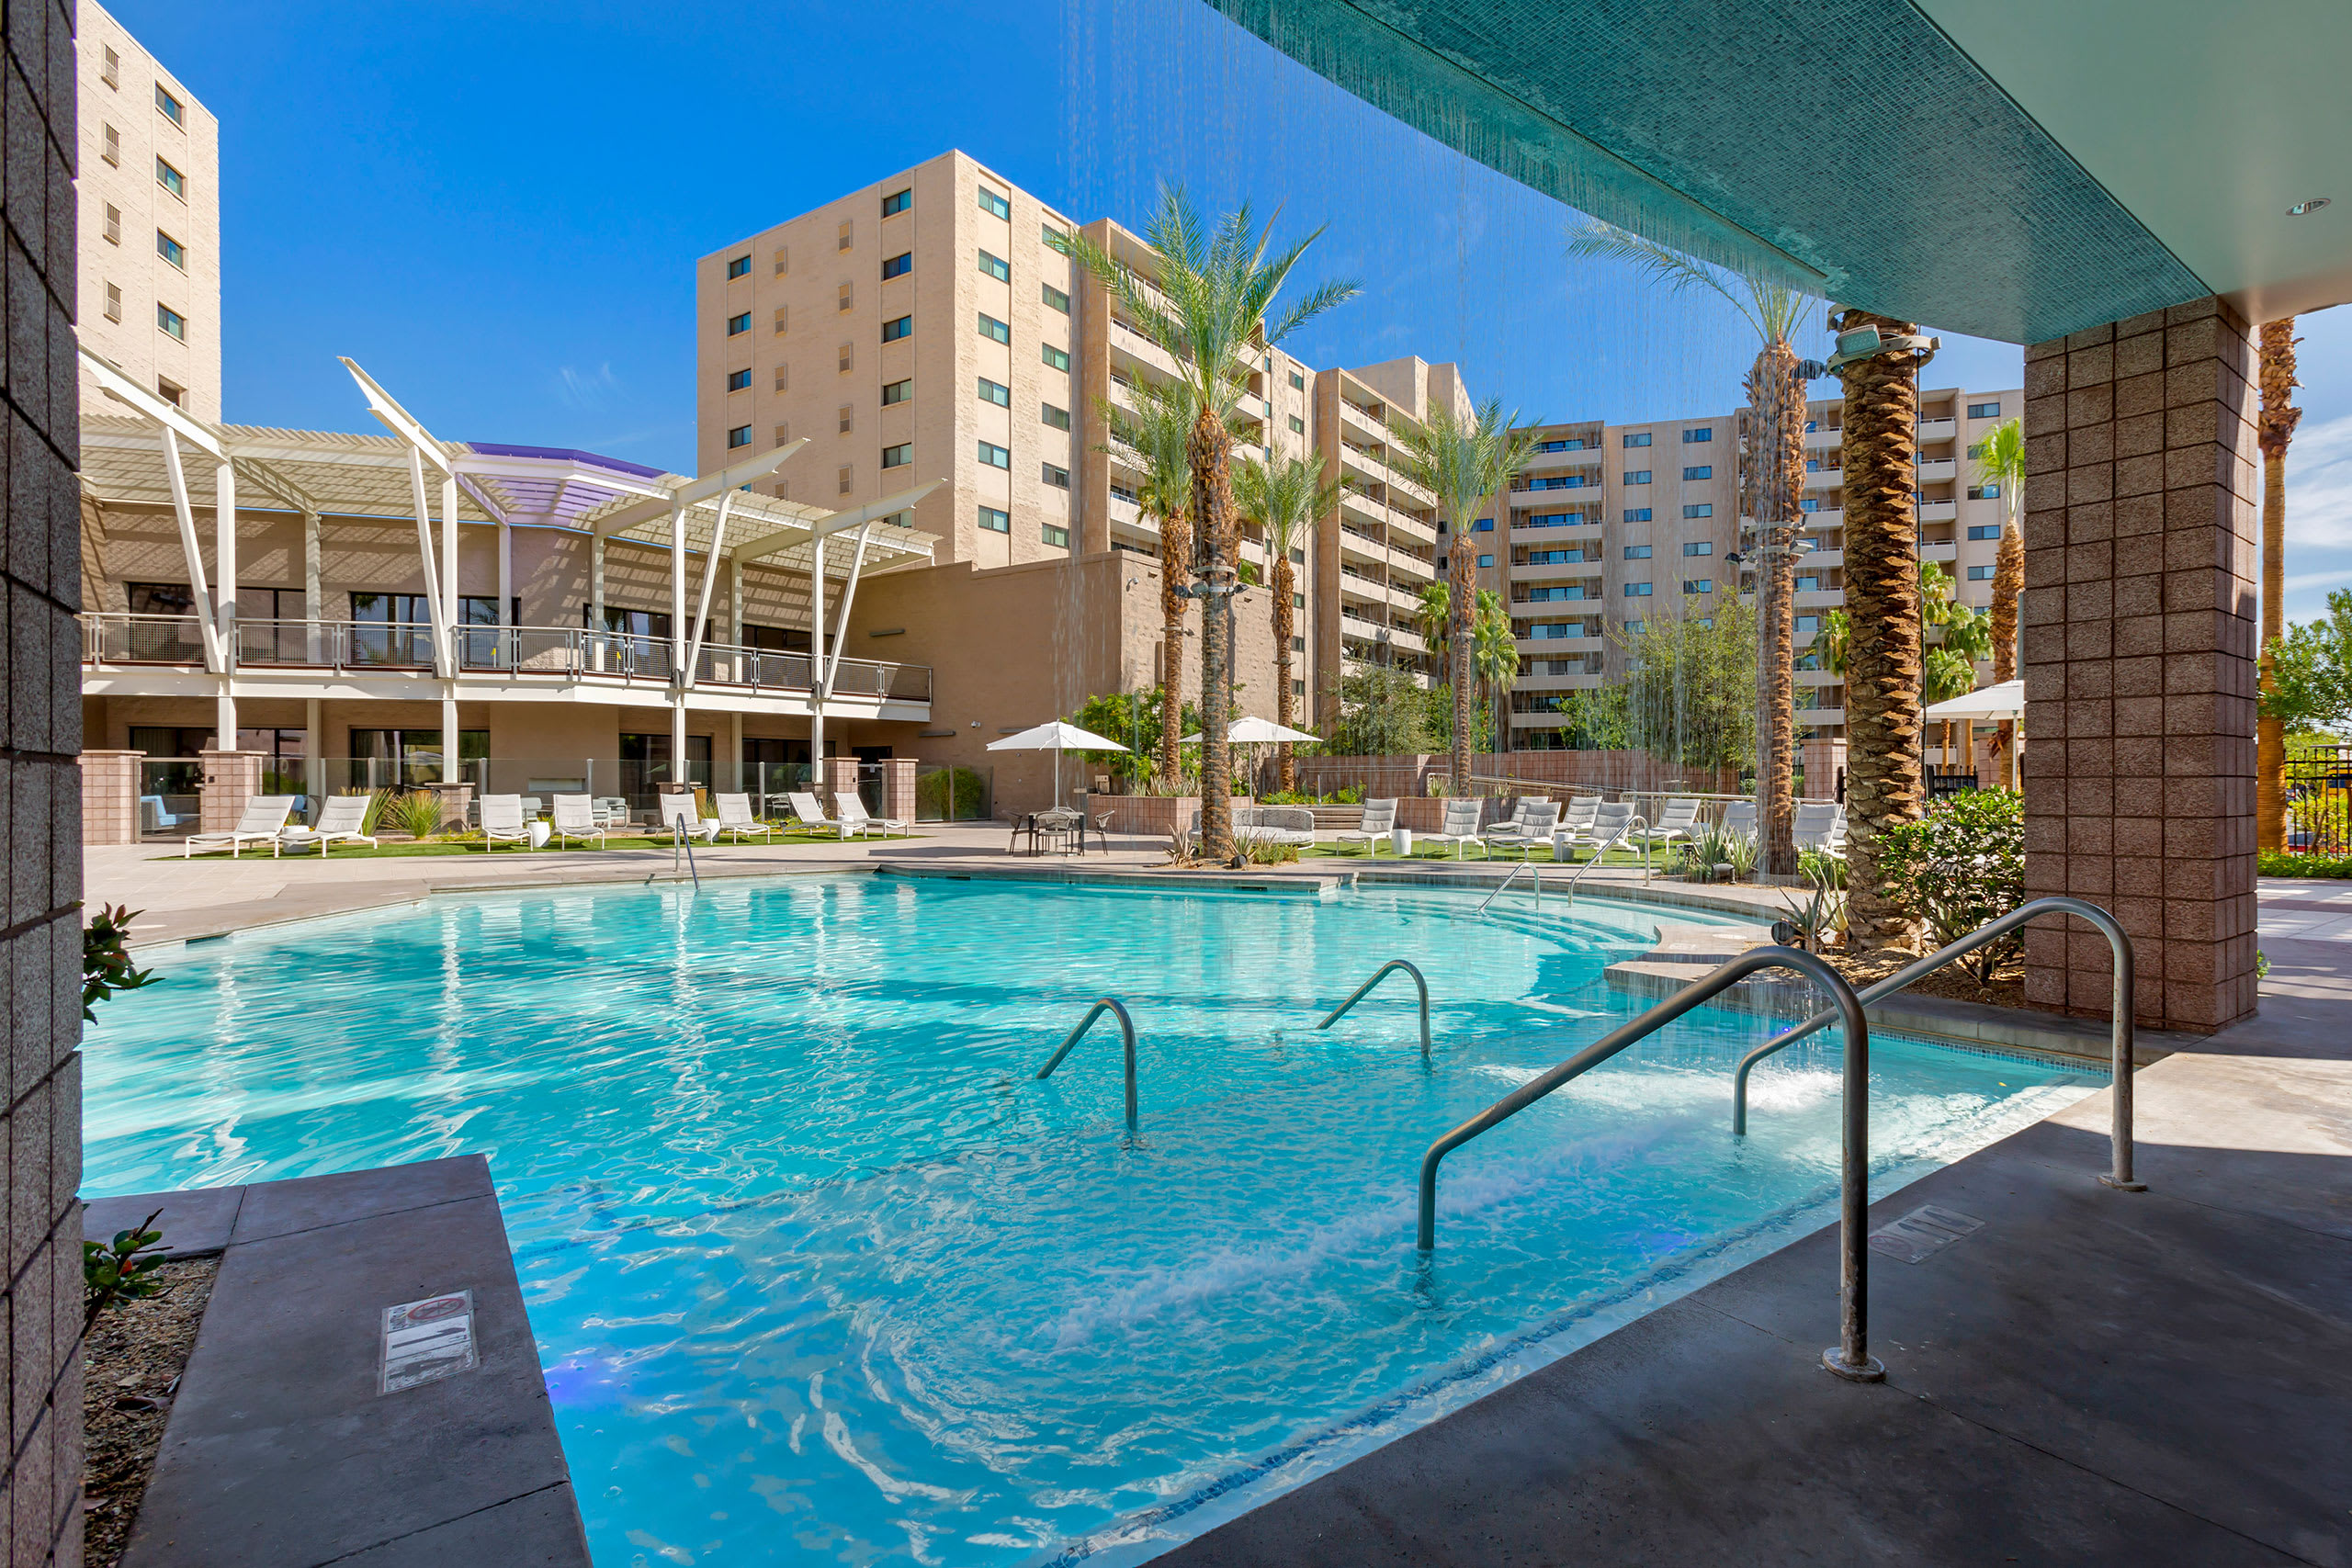 Las Vegas Strip Vacation Rentals with a Pool - Nevada, United States